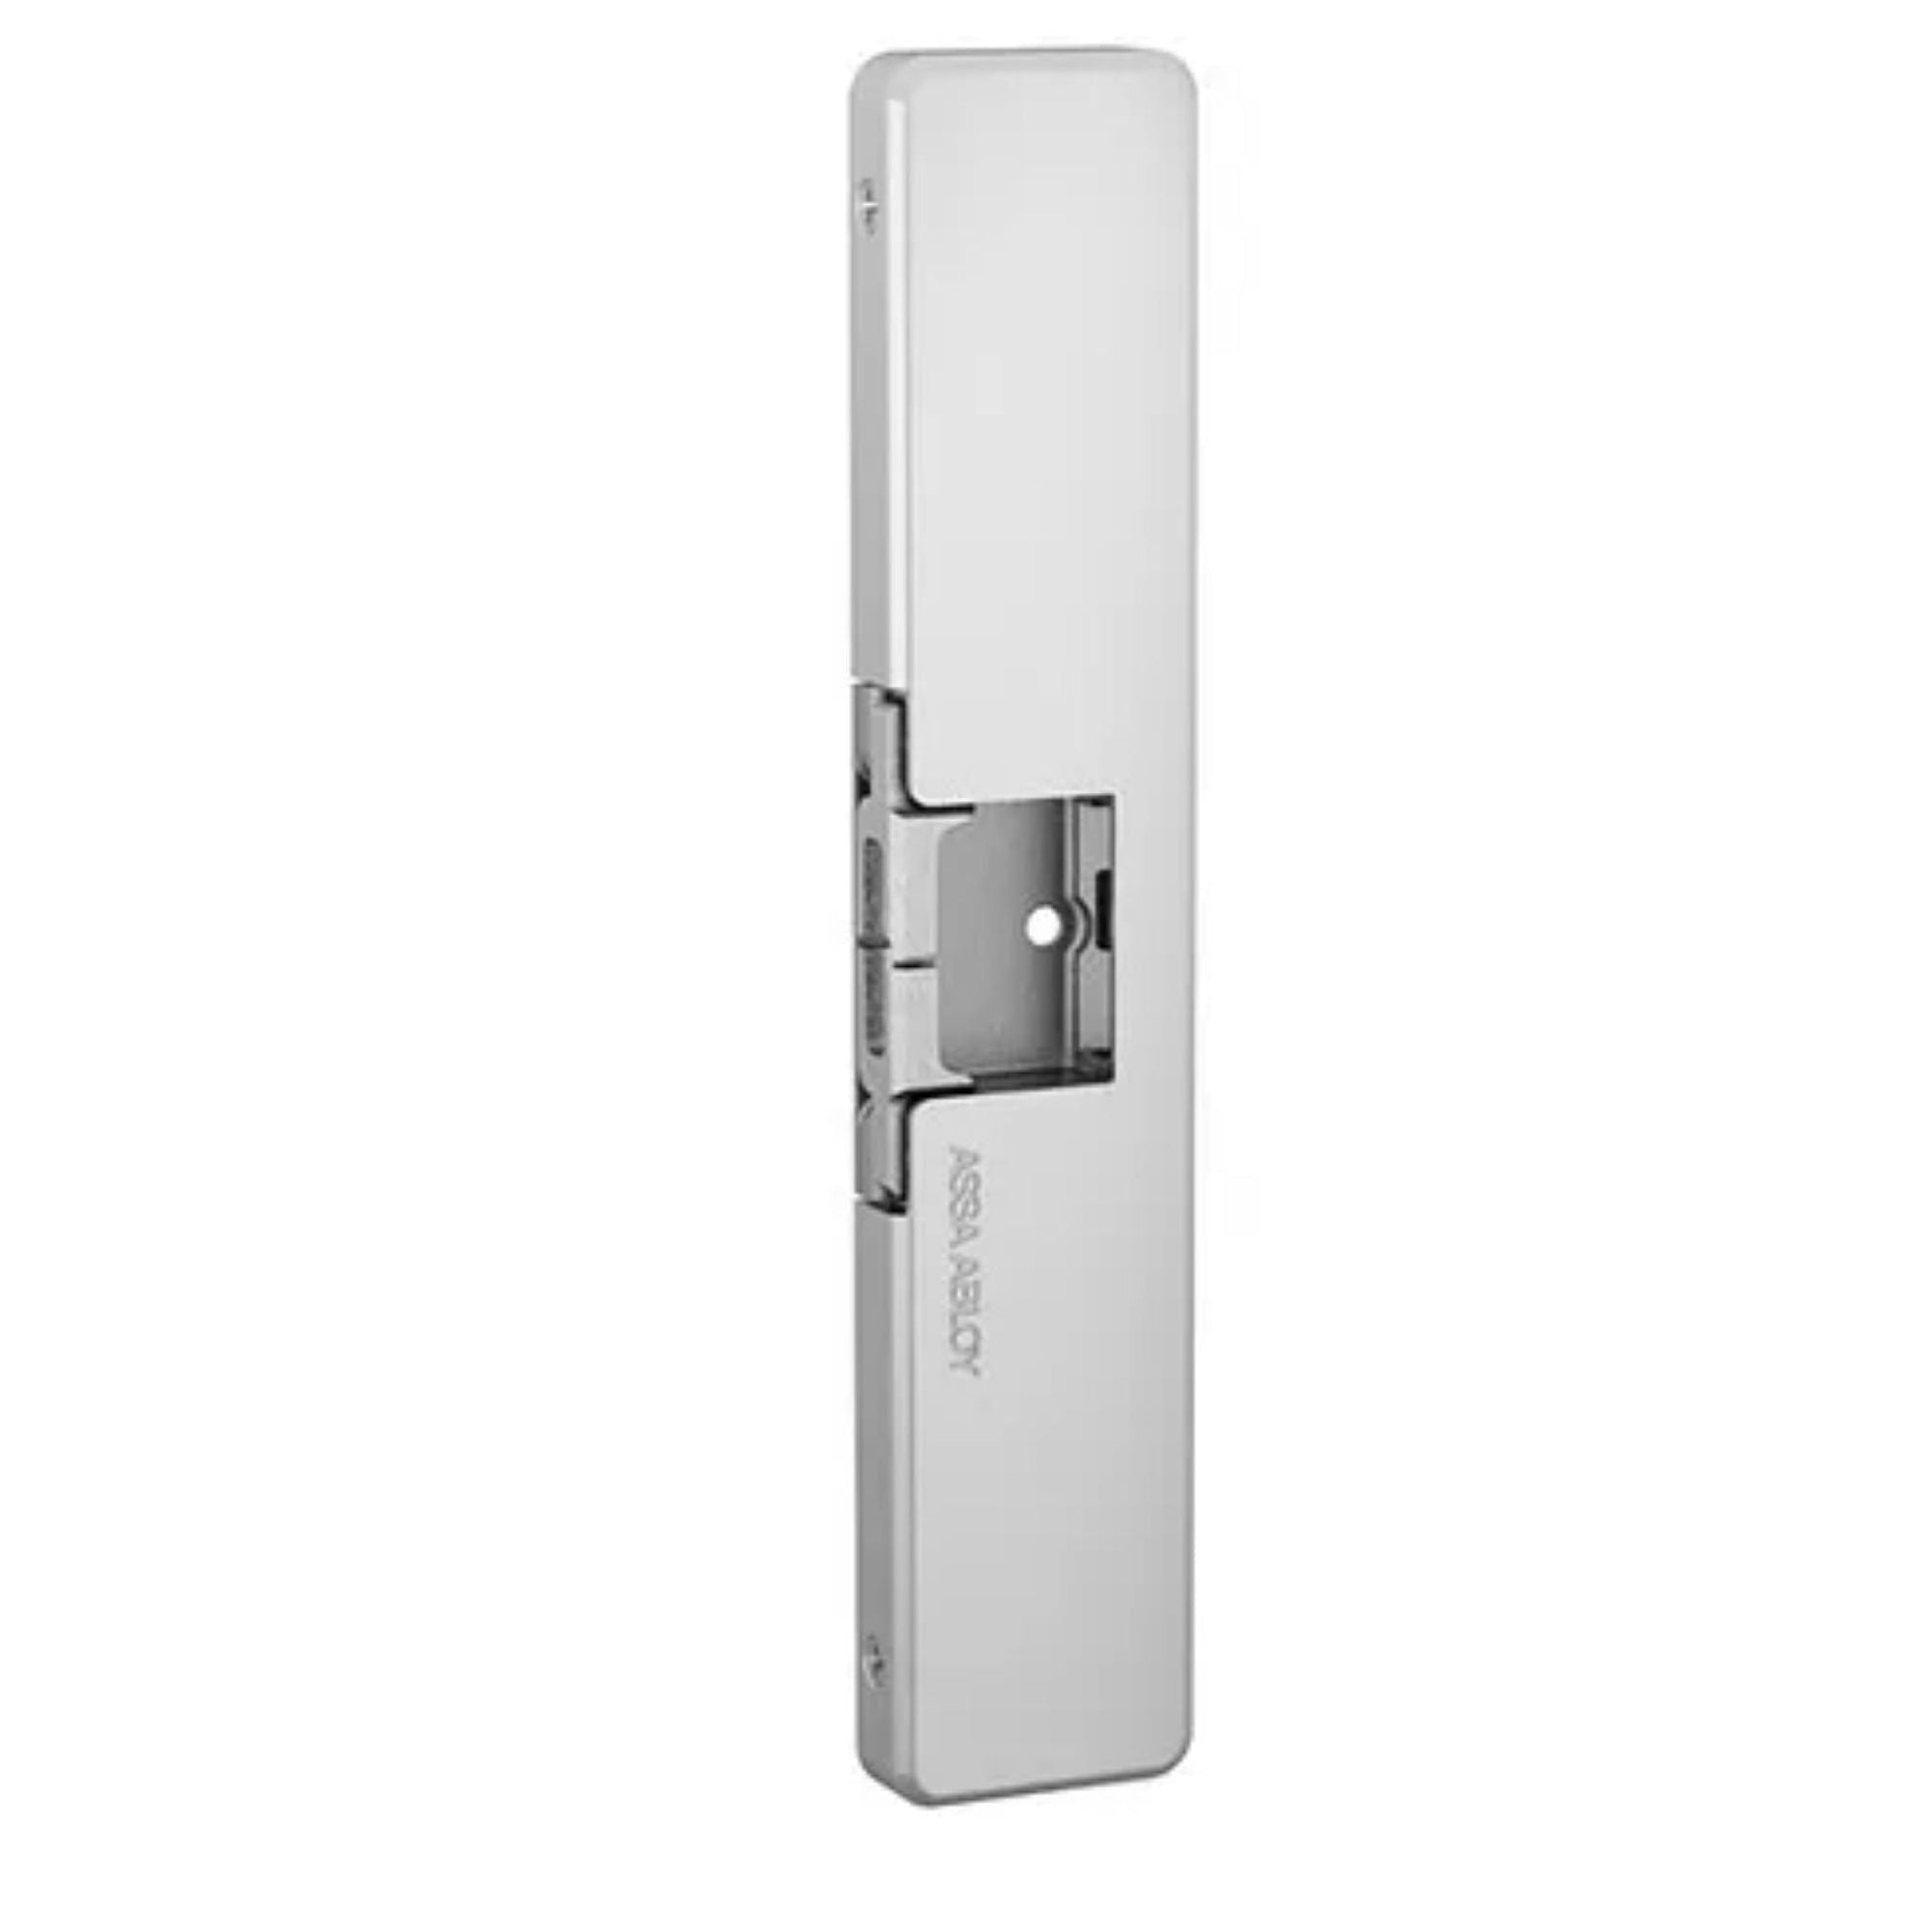 HES 9800 Low Profile Surface Mounted Electric Strikes for Adams Rite 8700 & 800 Rim Exit Devices - The Lock Source